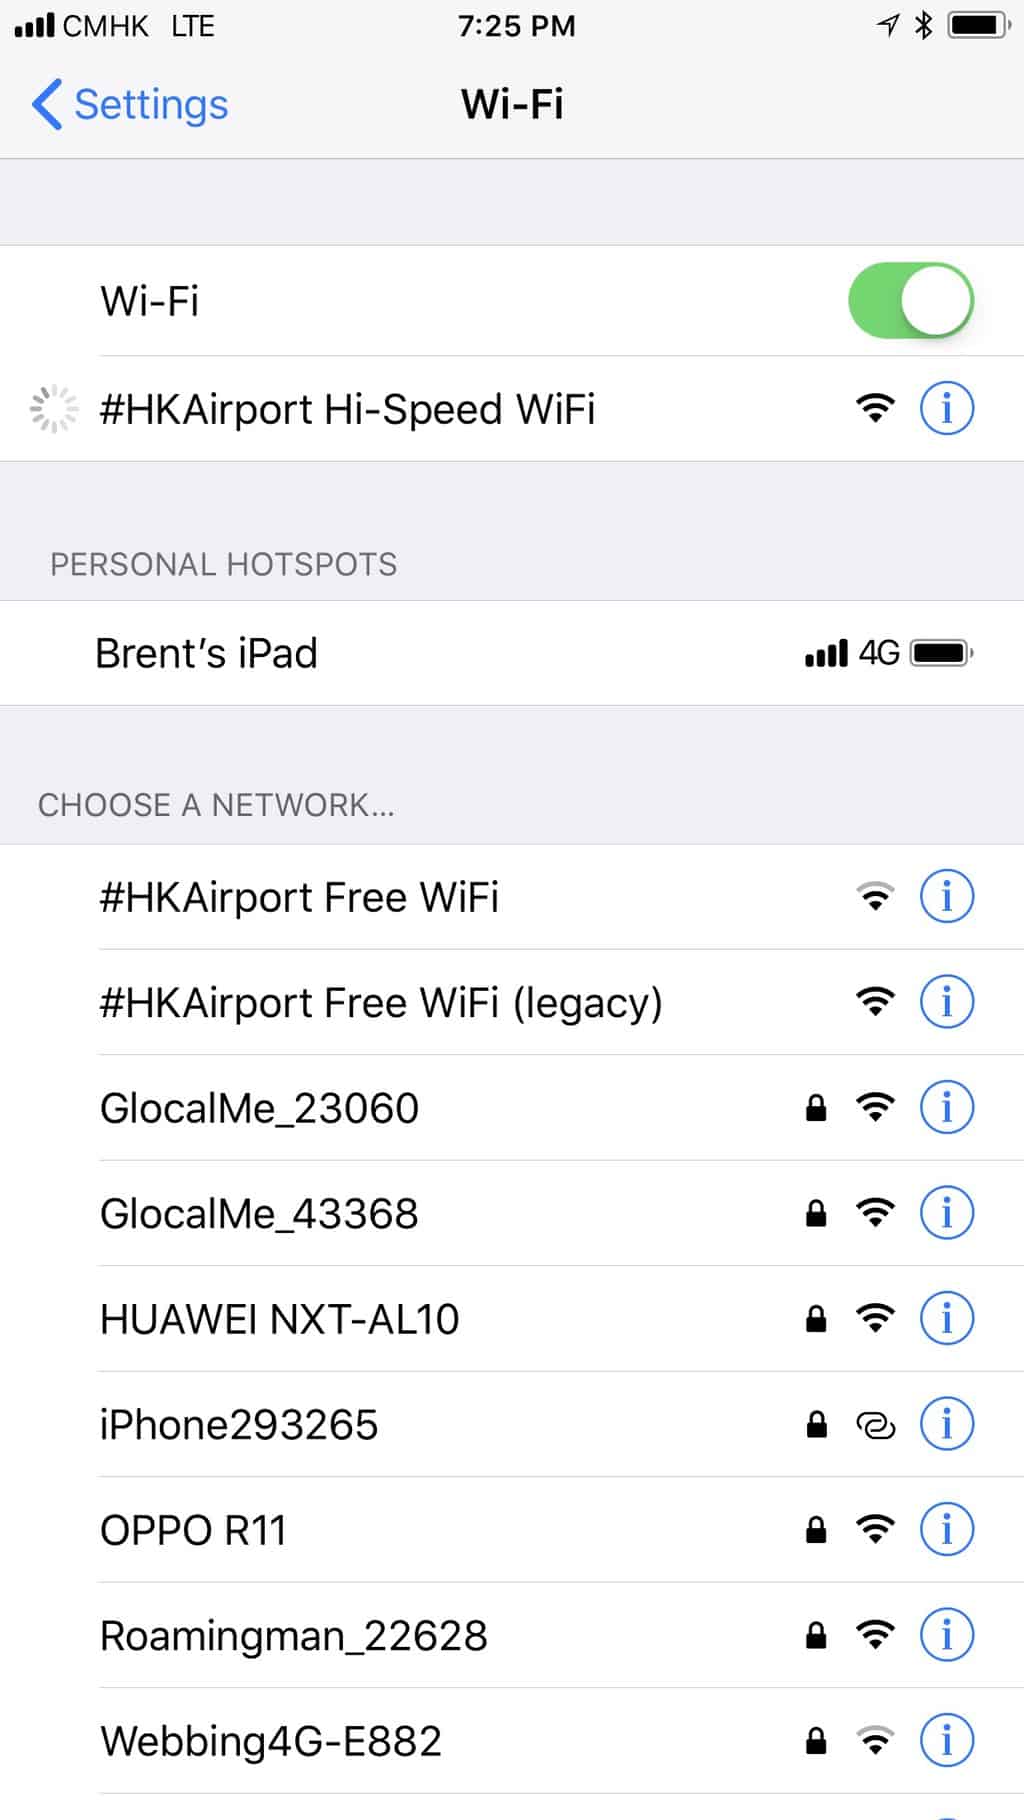 Super fast WiFi comes to the Hong Kong Airport 